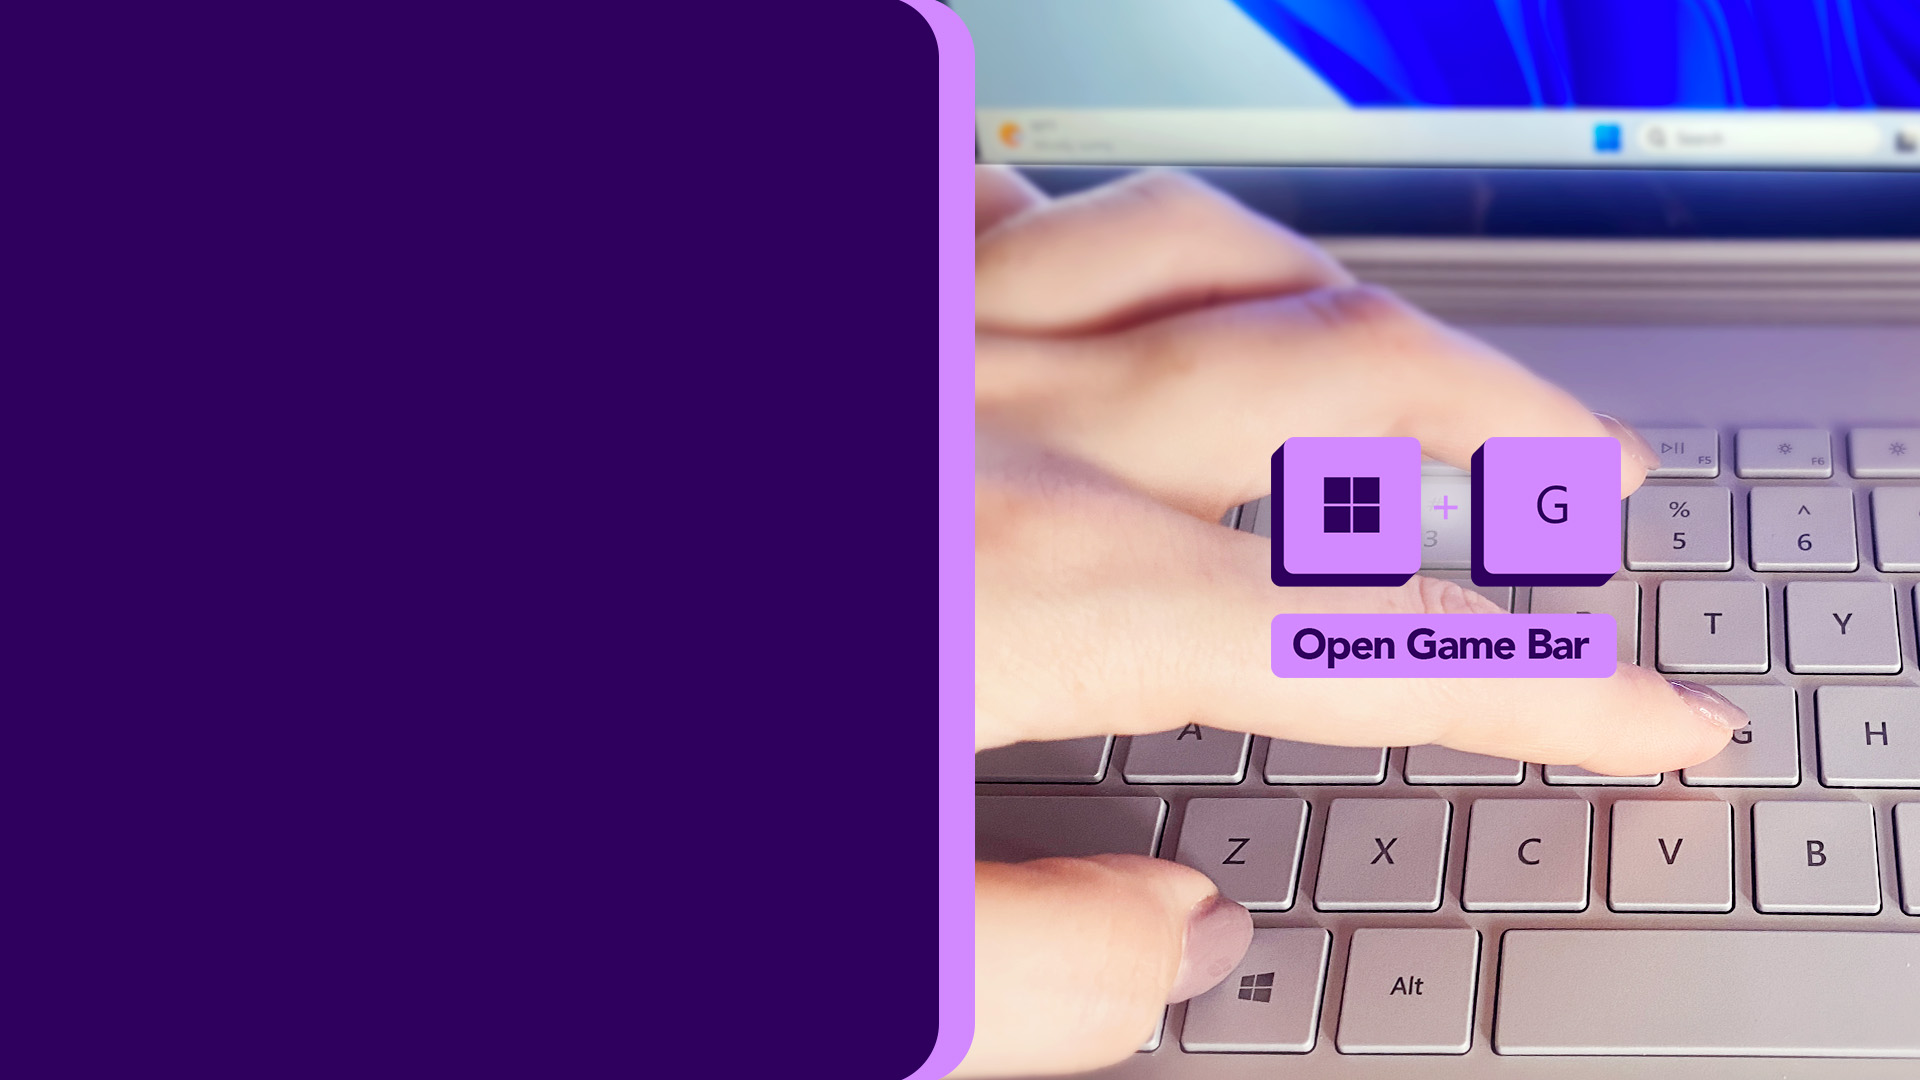 A hand hovers over a keyboard using Windows keyboard shortcuts windows key and g